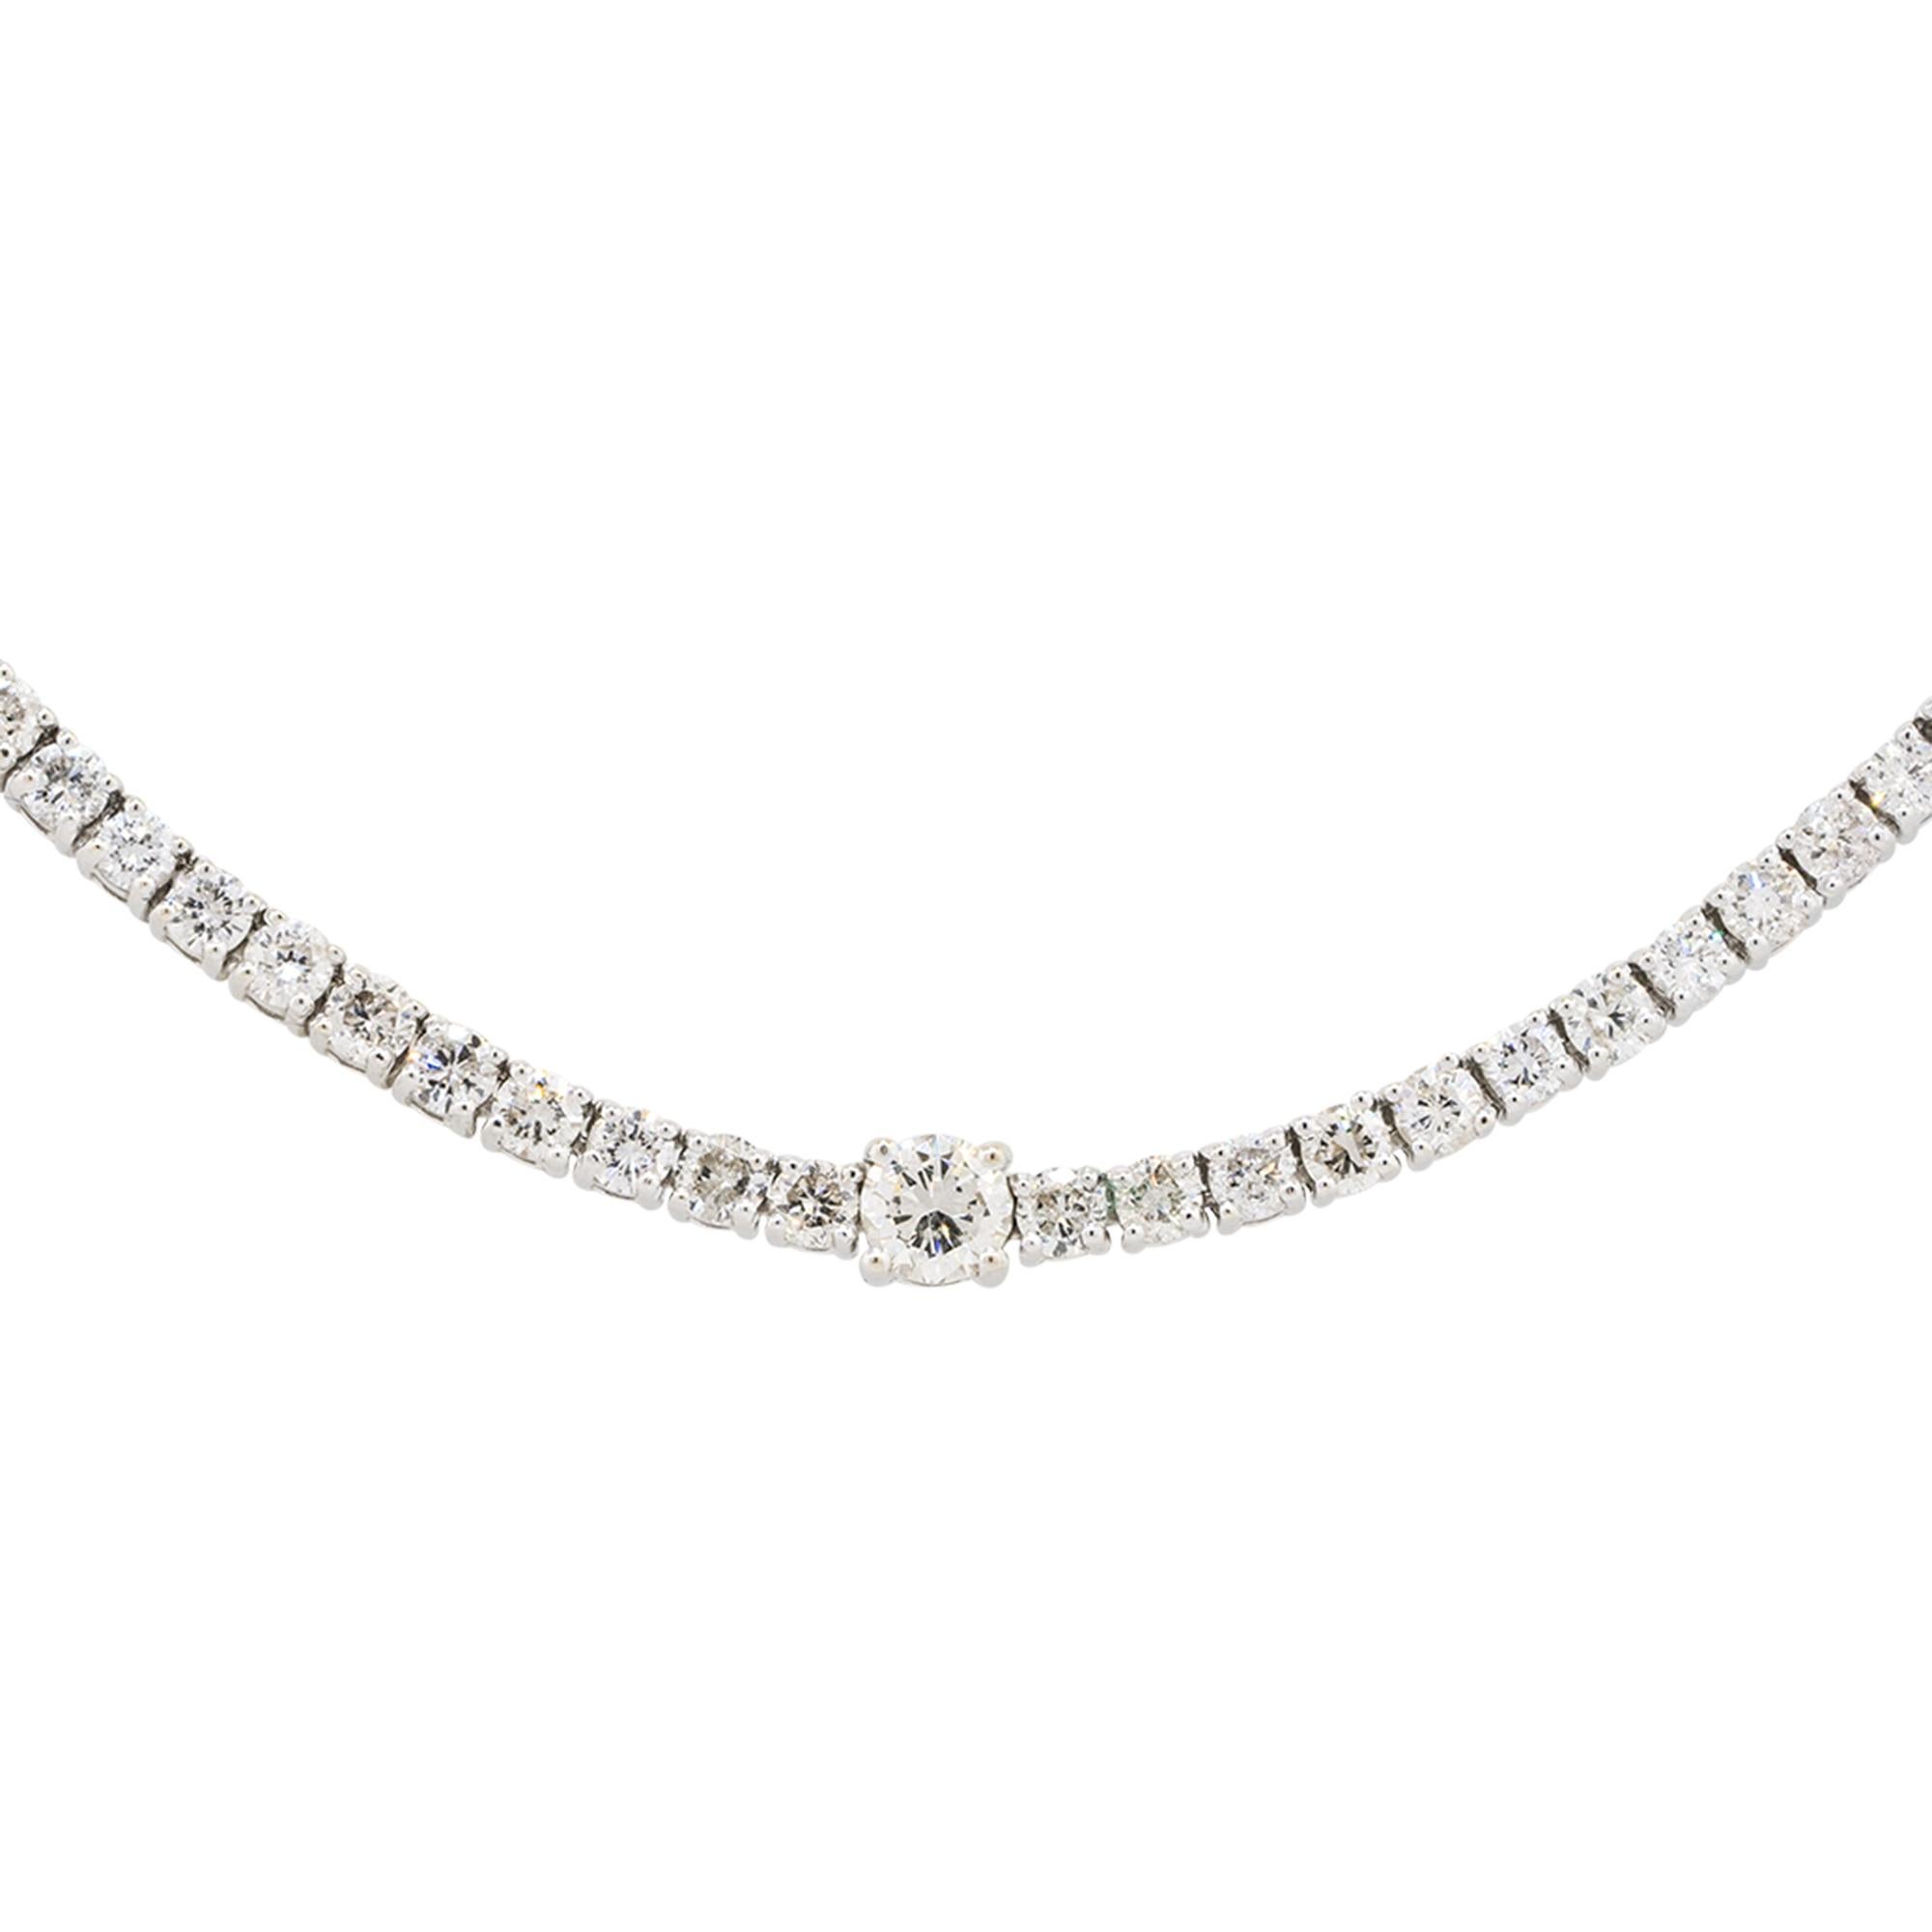 Material: 14k white gold
Diamond Details: Approx. 7.50ctw of round cut Diamonds. Diamonds are G/H in color and VS in clarity
Clasps: Tongue in box
Total Weight: 14.7g (9.4dwt)
Length: 18